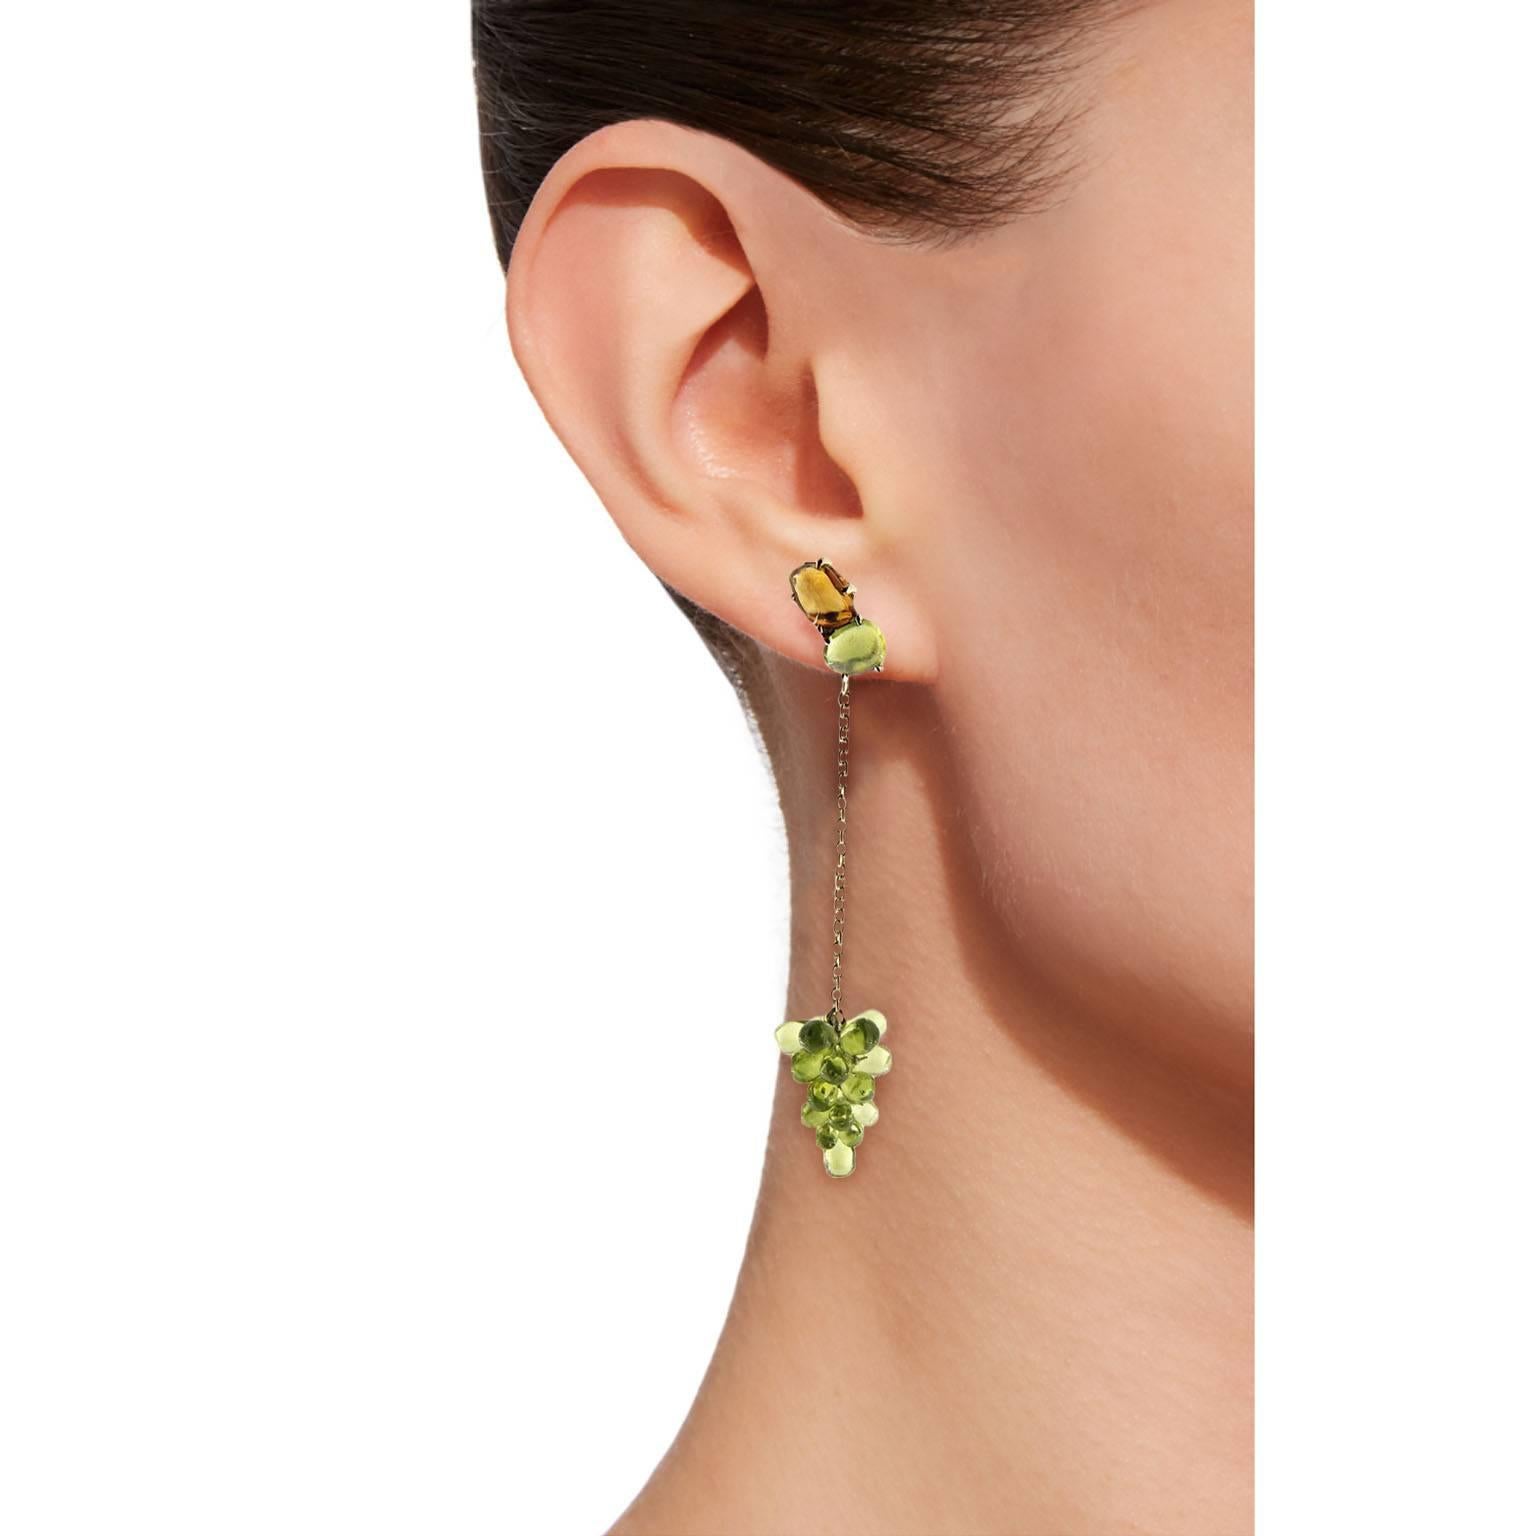 Jona design collection, hand crafted in Italy, beautiful Cluster of natural cabochon cut Peridot drops weighing 37 carats dangling from four free form cabochon cut Peridot and Citrine weighing 3.79 carats and 3.16 carats respectively, mounted in 18